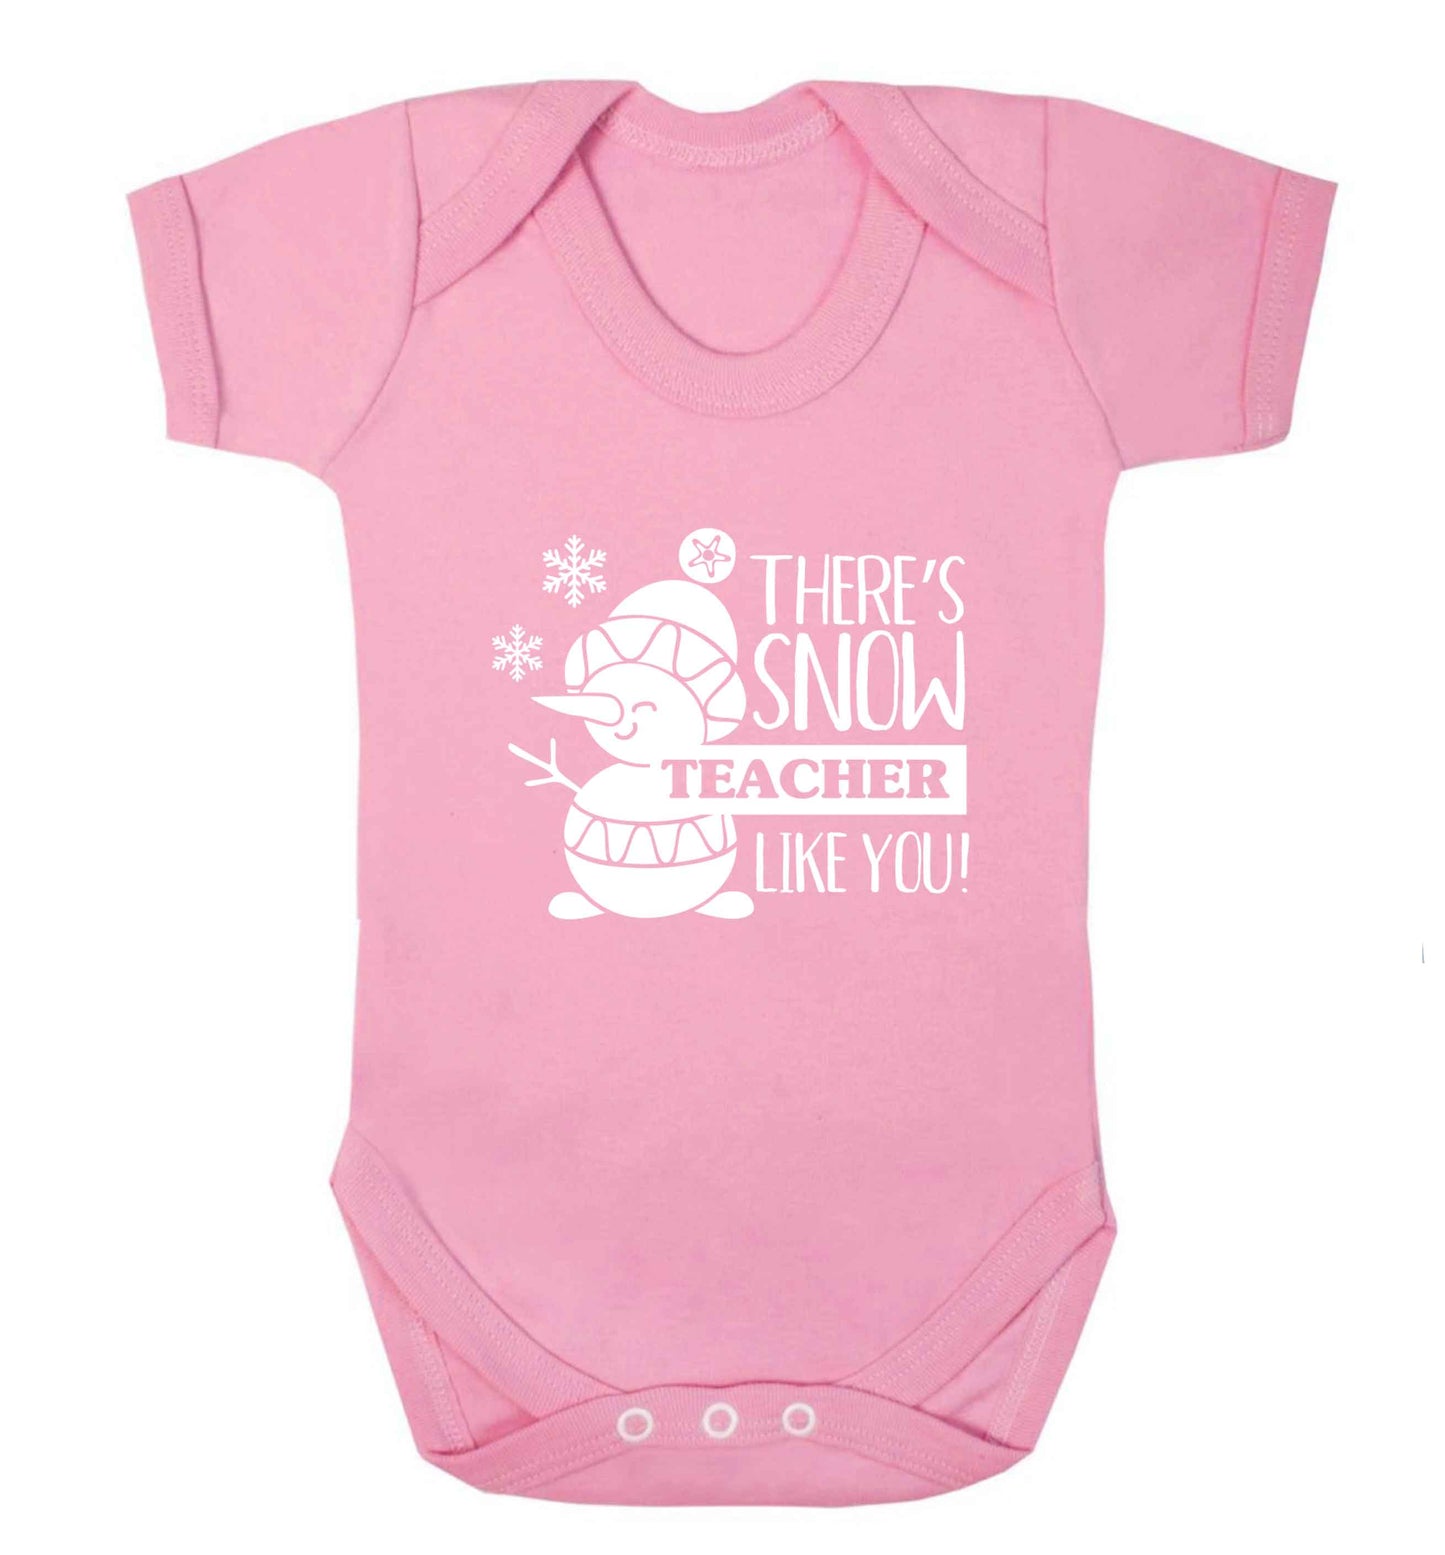 There's snow teacher like you baby vest pale pink 18-24 months